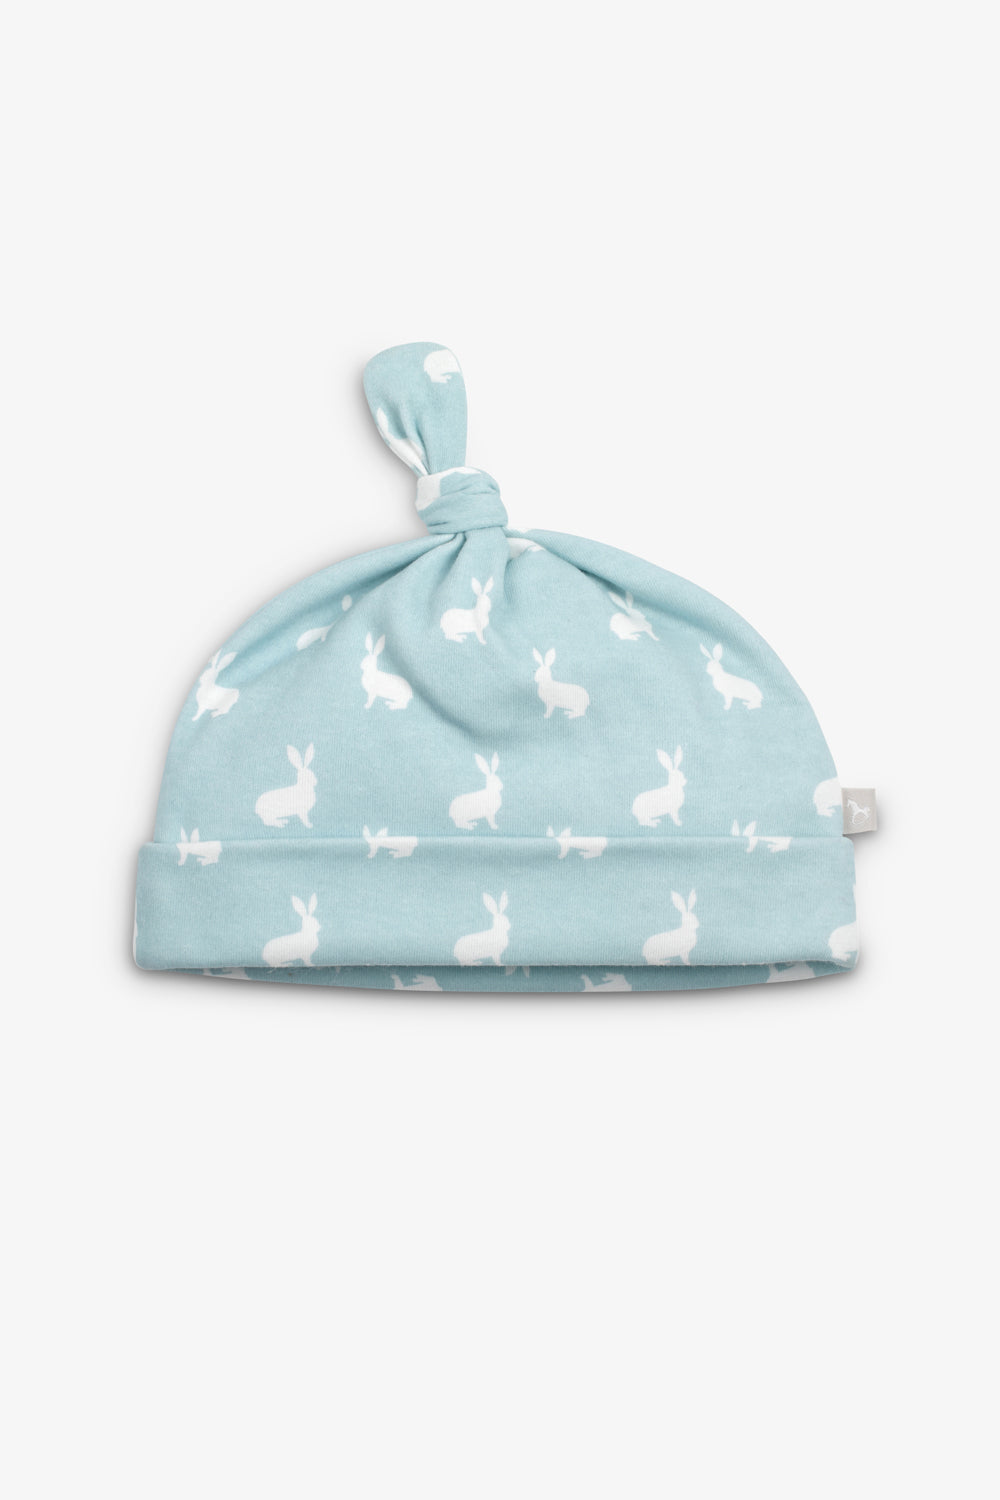 Welcome to the World Gift Set, sky blue hare print